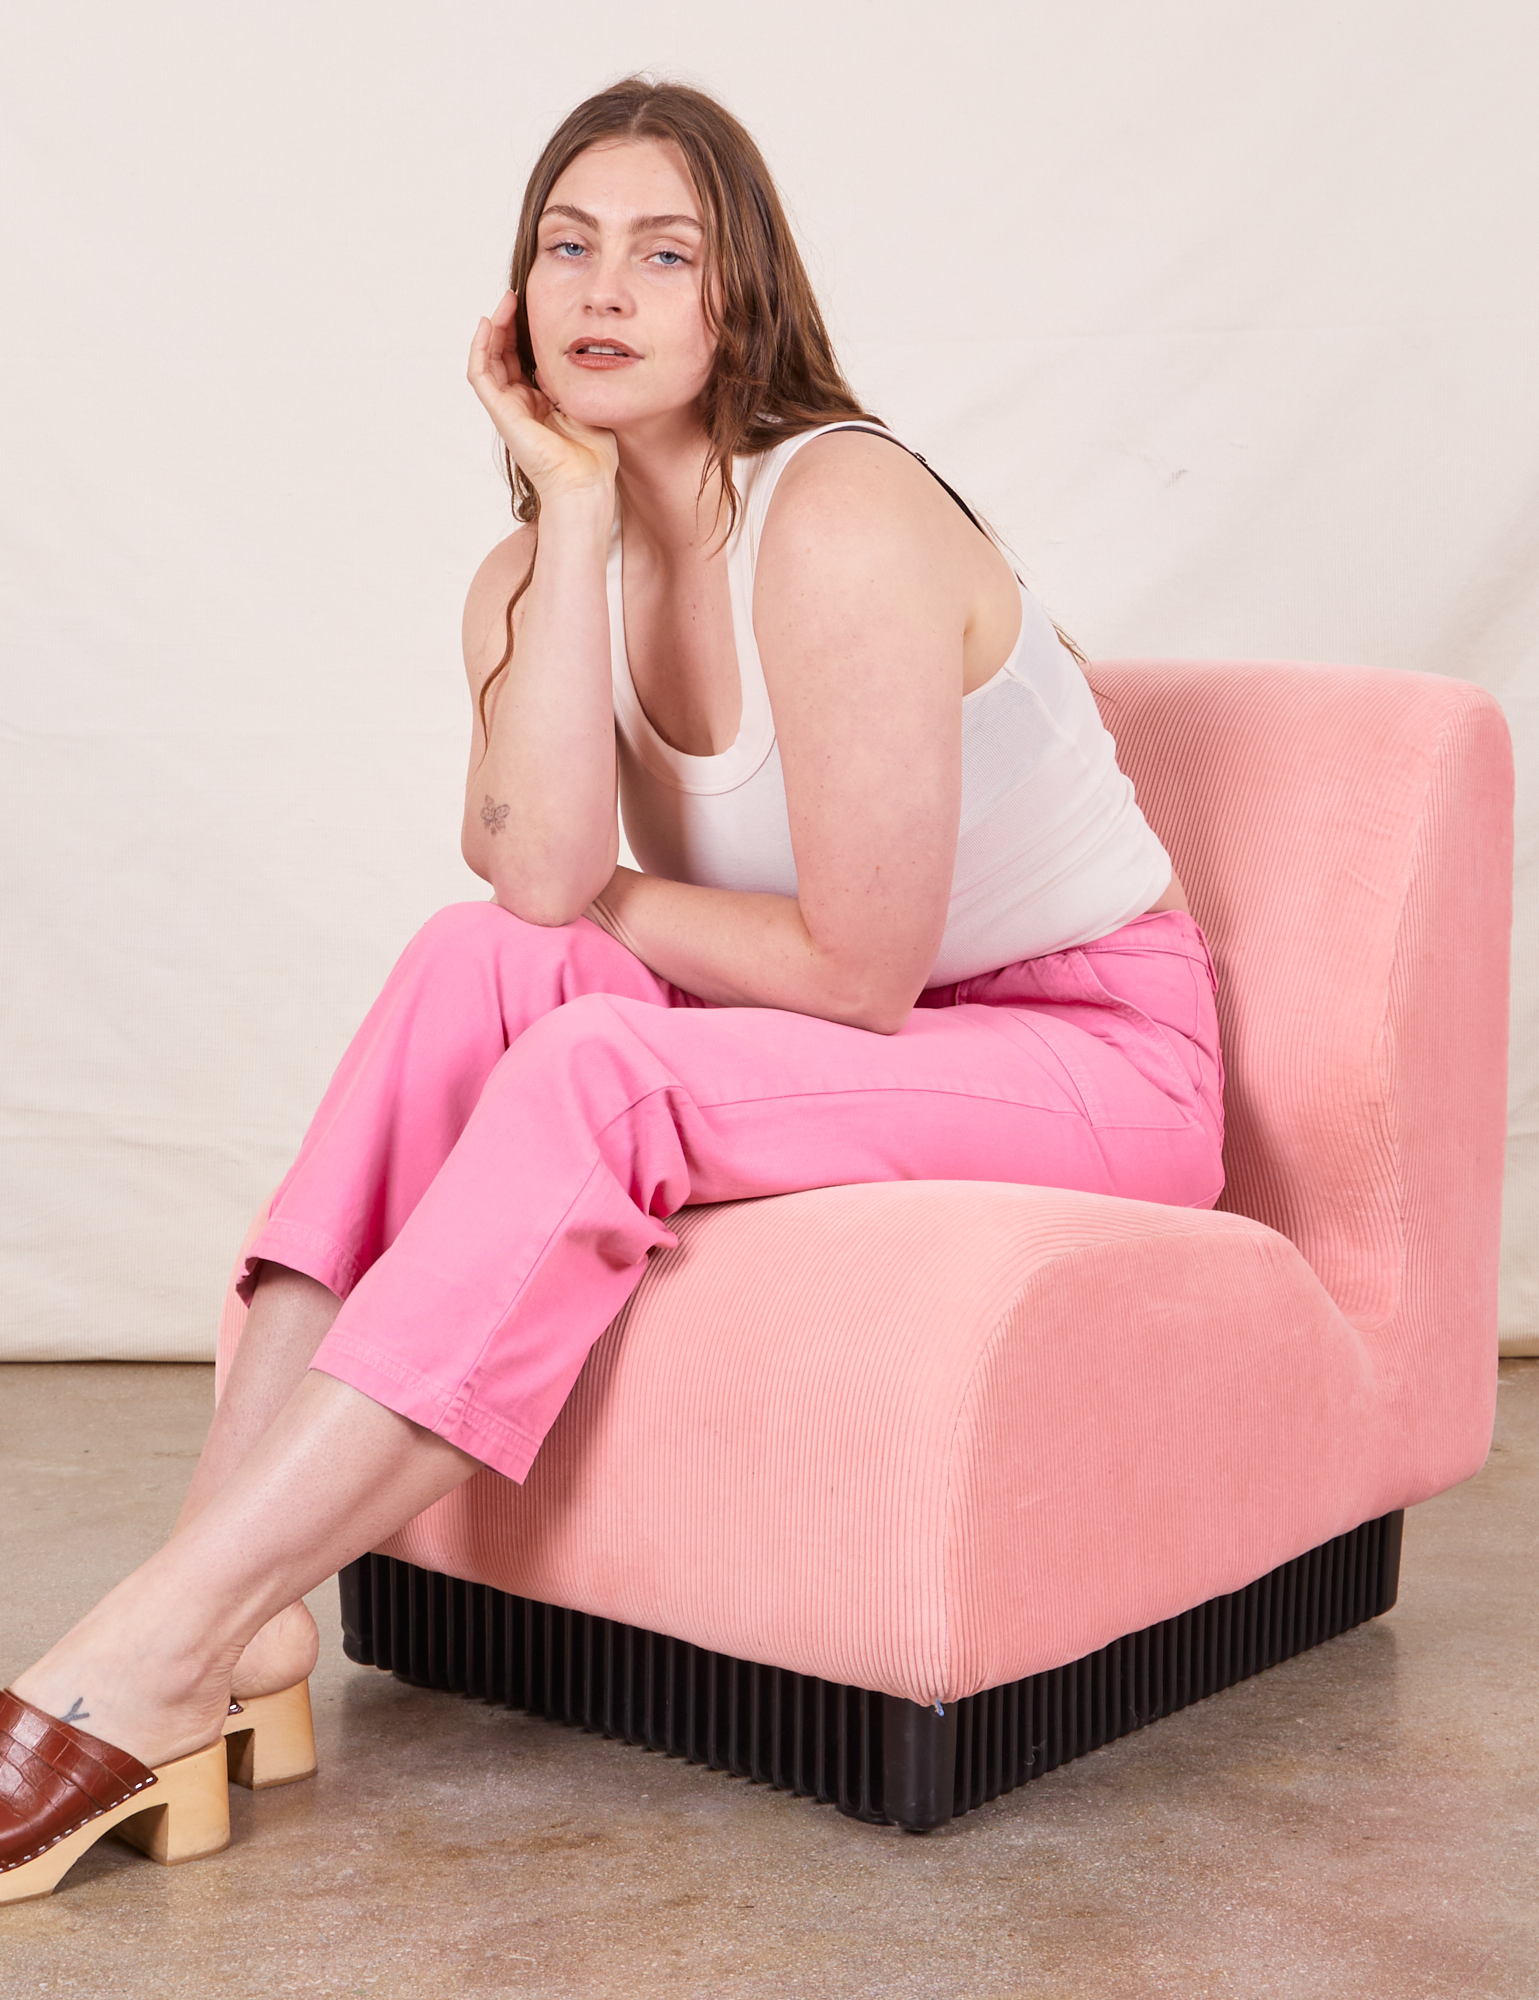 Work Pants in Bubblegum Pink on Allison wearing Tank Top in vintage tee off-white sitting in pink upholstered chair